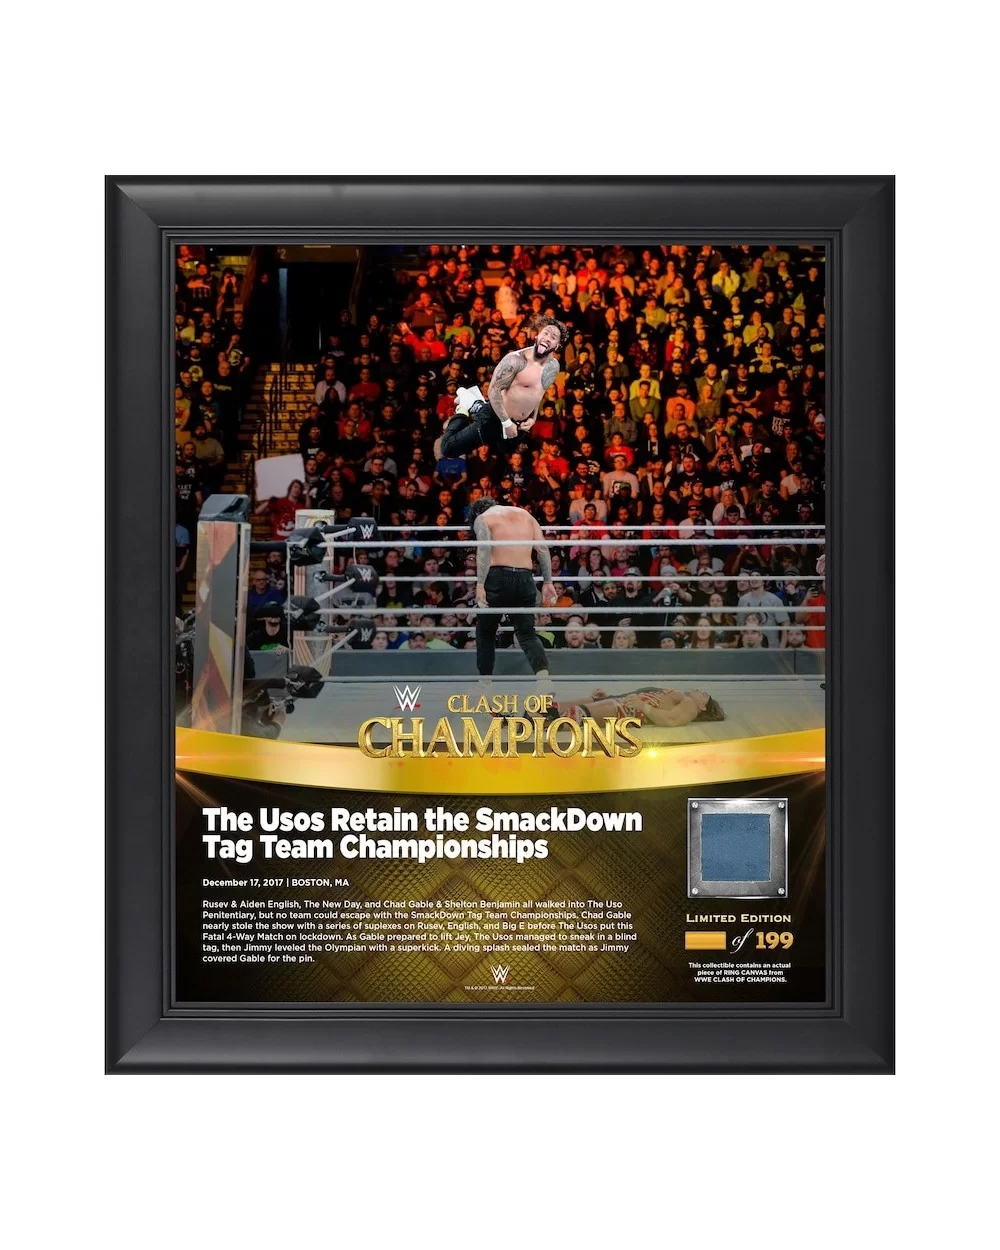 The Usos Framed 15" x 17" 2017 Clash of Champions Collage with a Piece of Match-Used Canvas - Limited Edition of 199 $27.44 H...